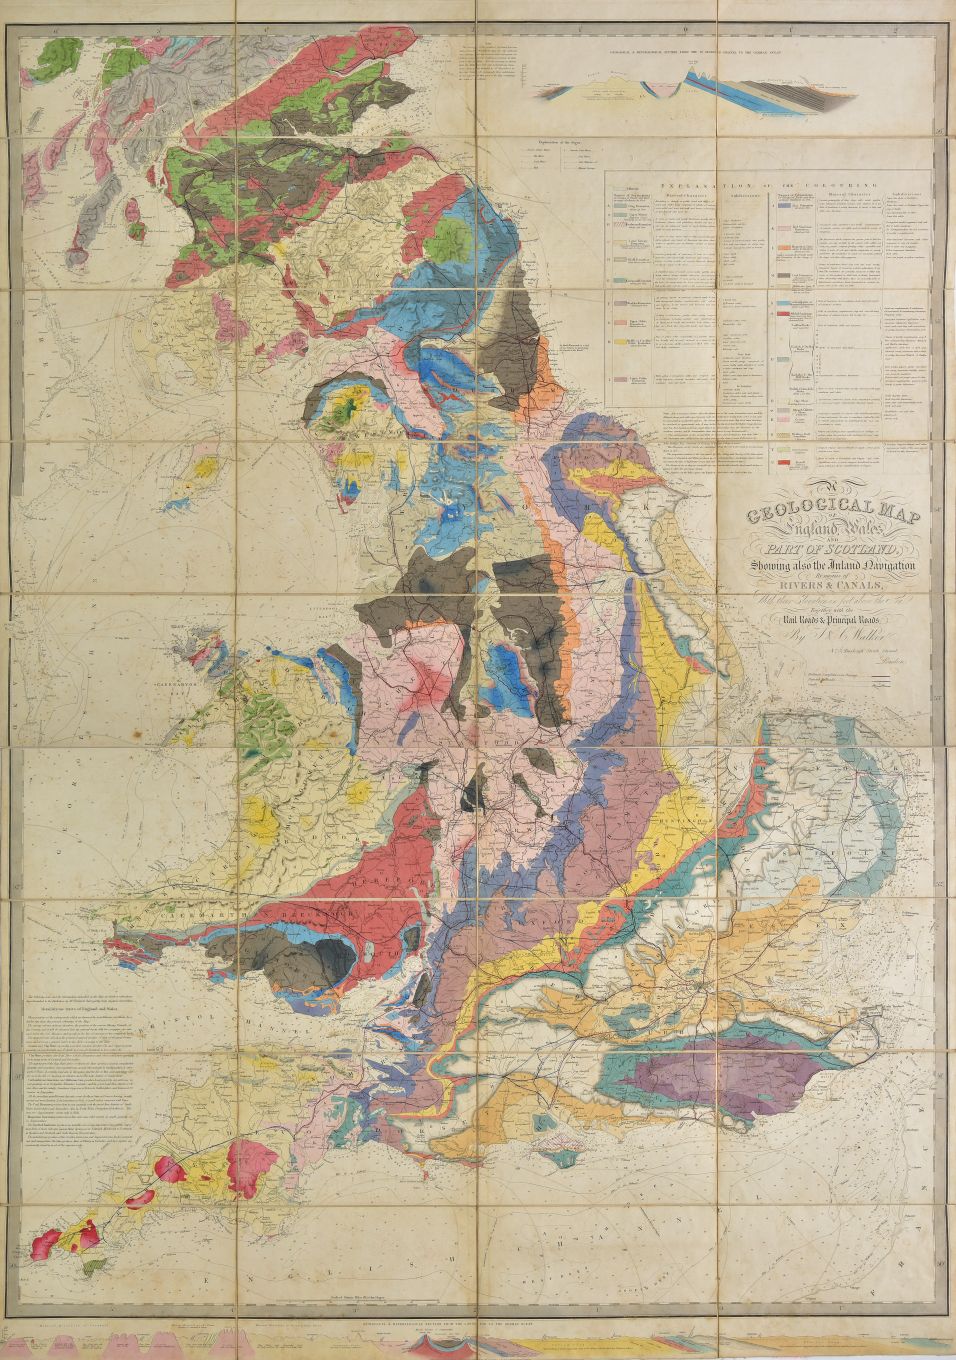 England & Wales. Walker (J. & C.), A Geological Map of England & Wales and part of Scotland, showing